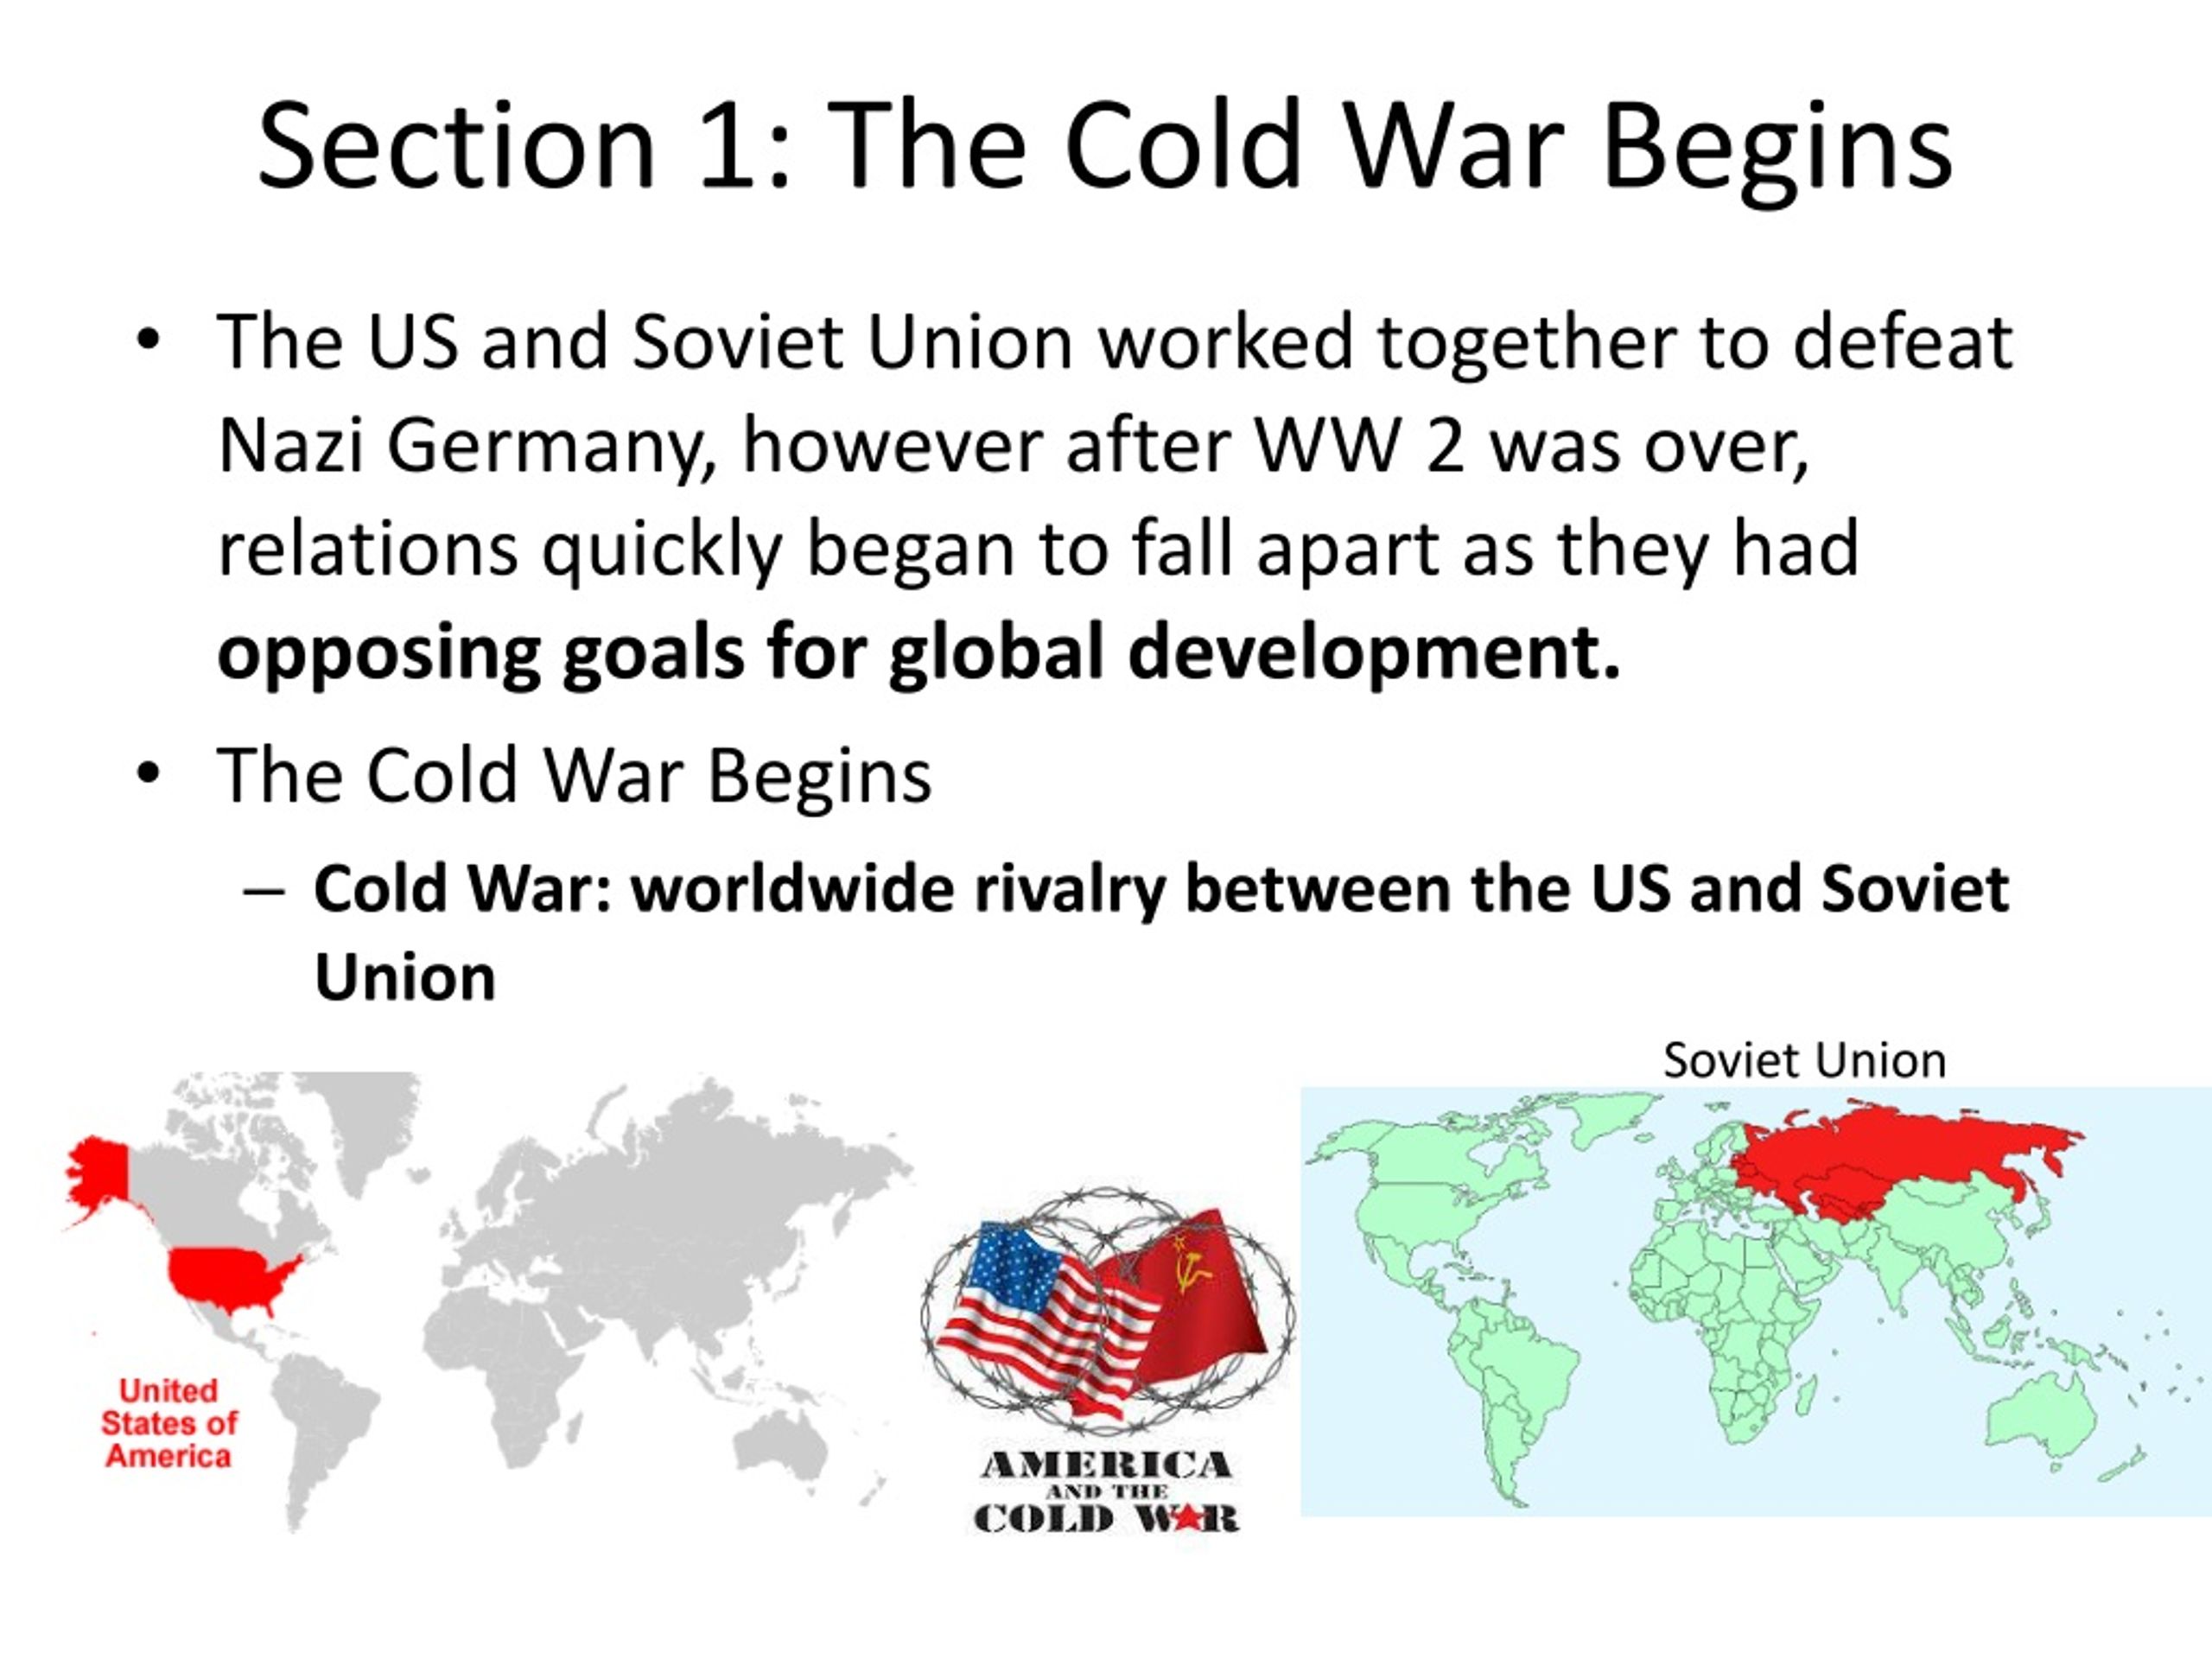 why is the time period from 1947-1991 called the cold war